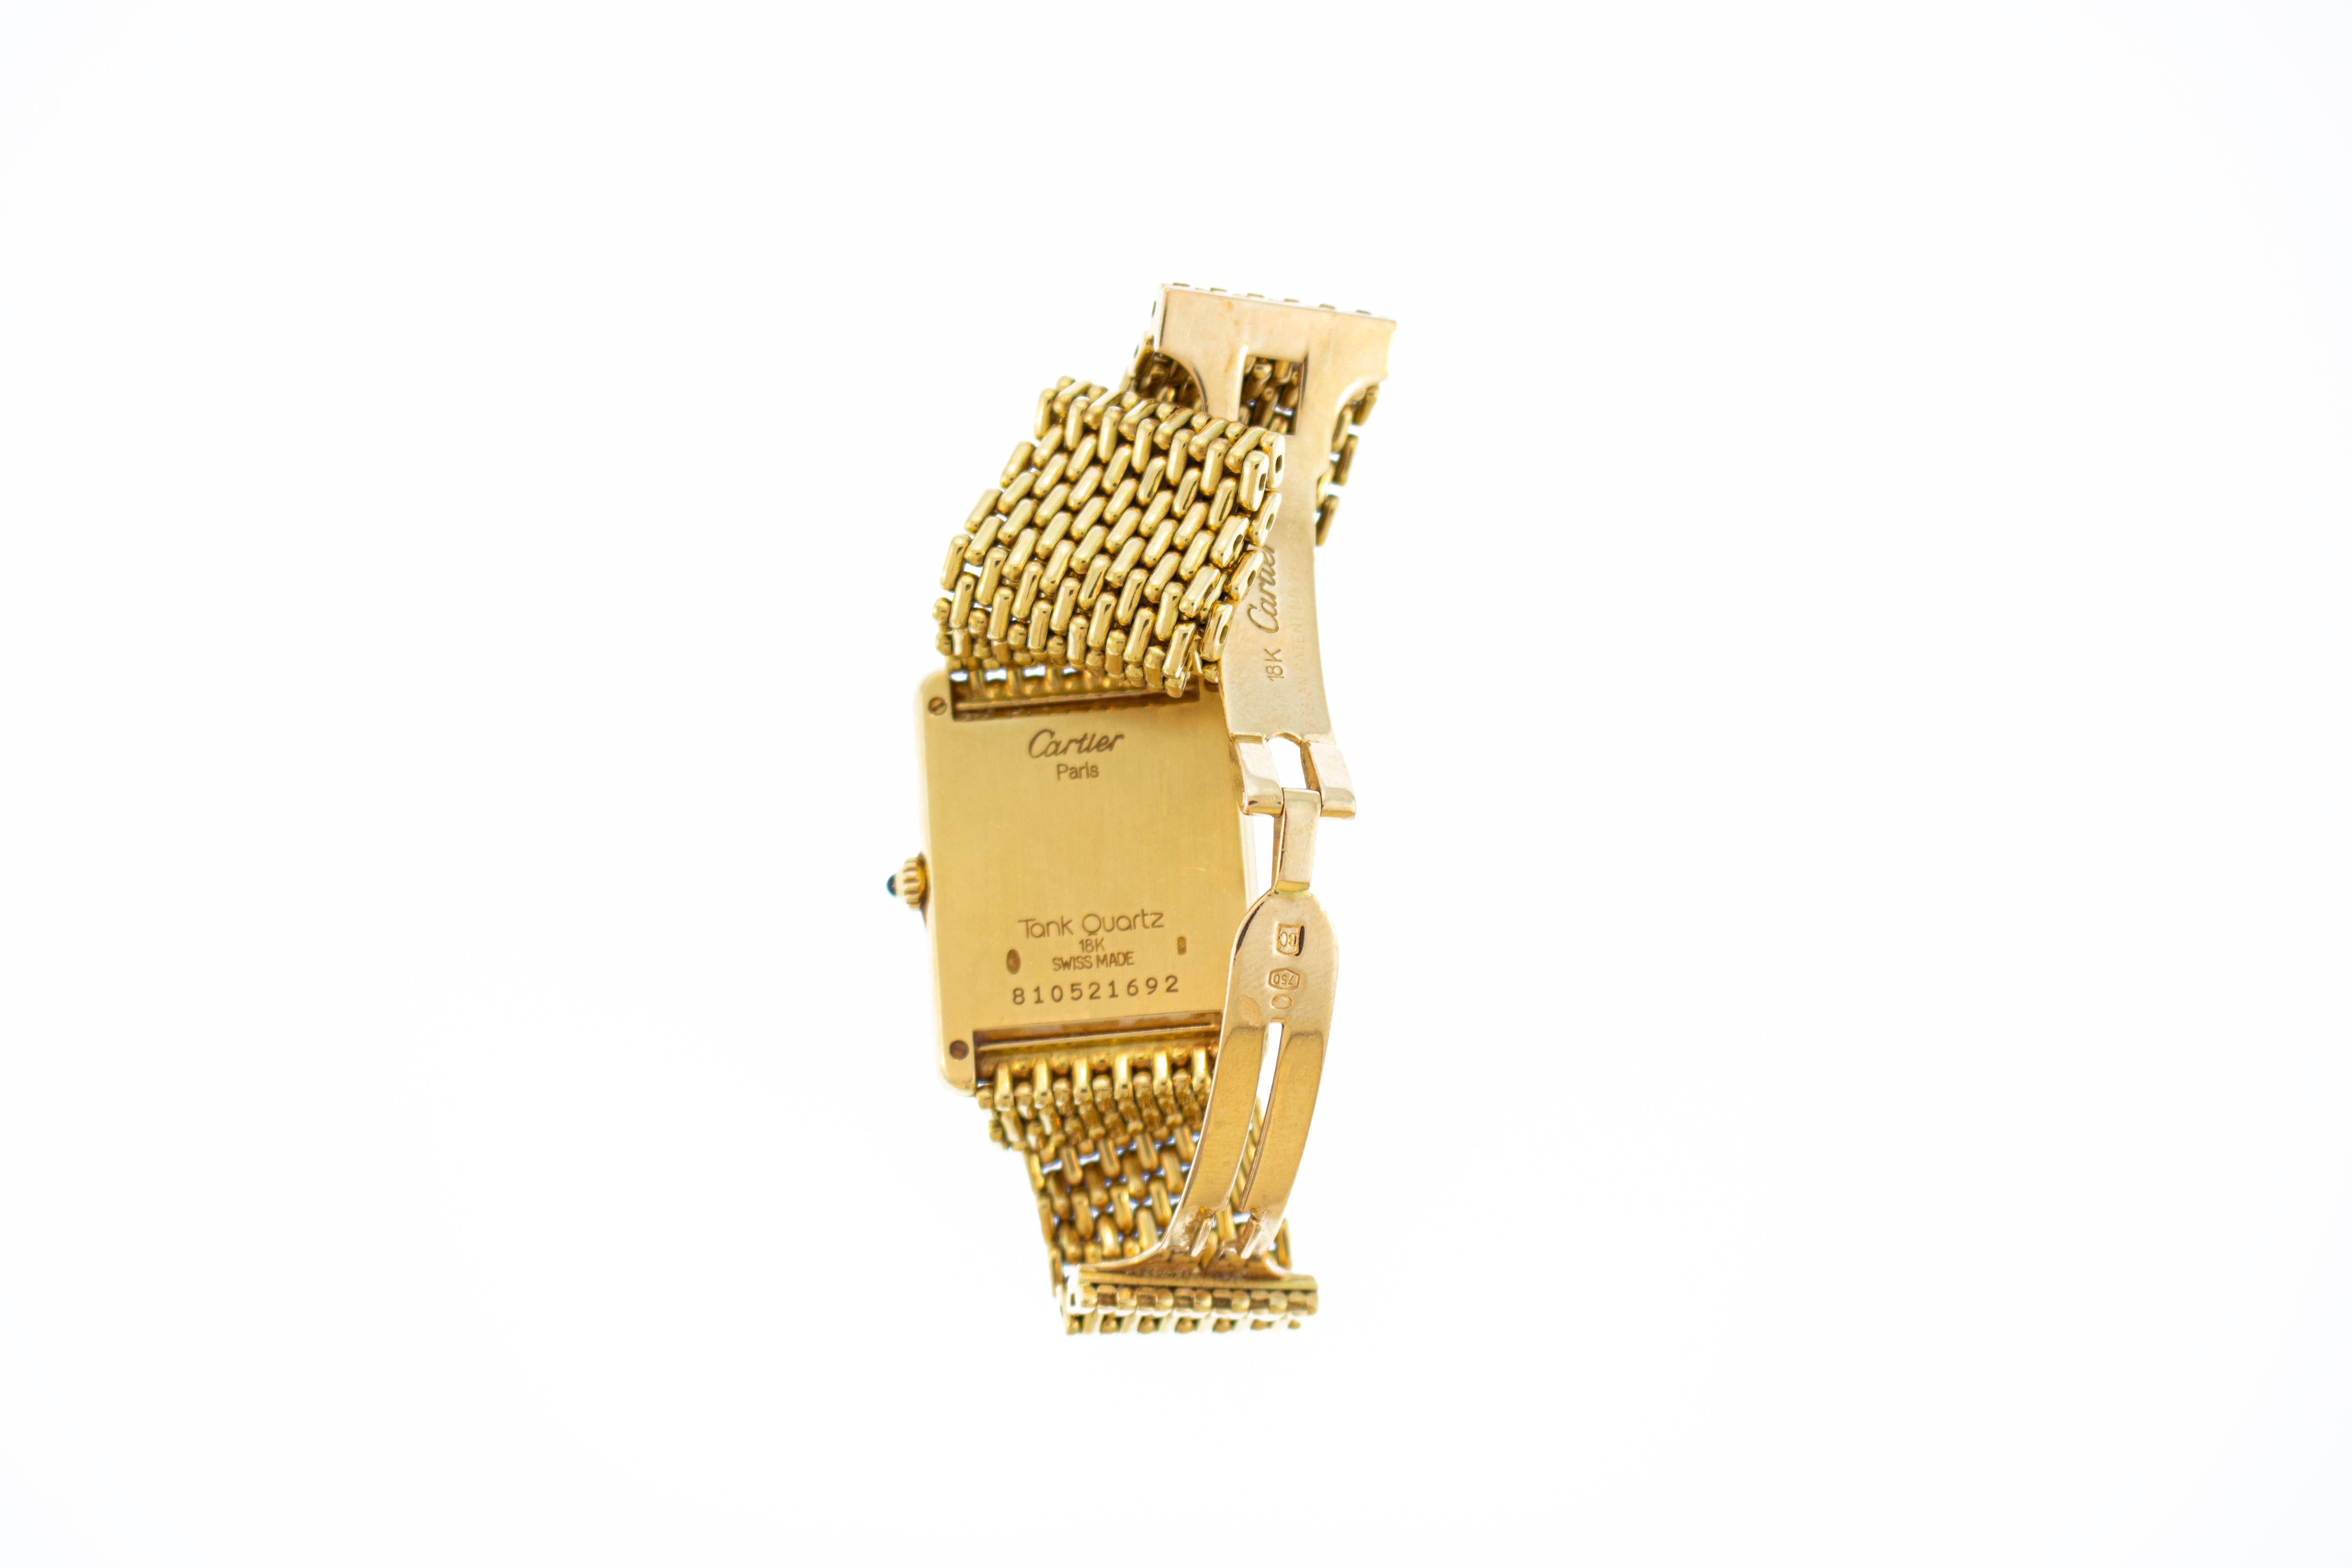 Beautiful 18k gold quartz Cartier tank watch with the gold jubilee band. Including movement watch weighs a total of 70.25 grams. Watch face 25.4mm by 20.32mm